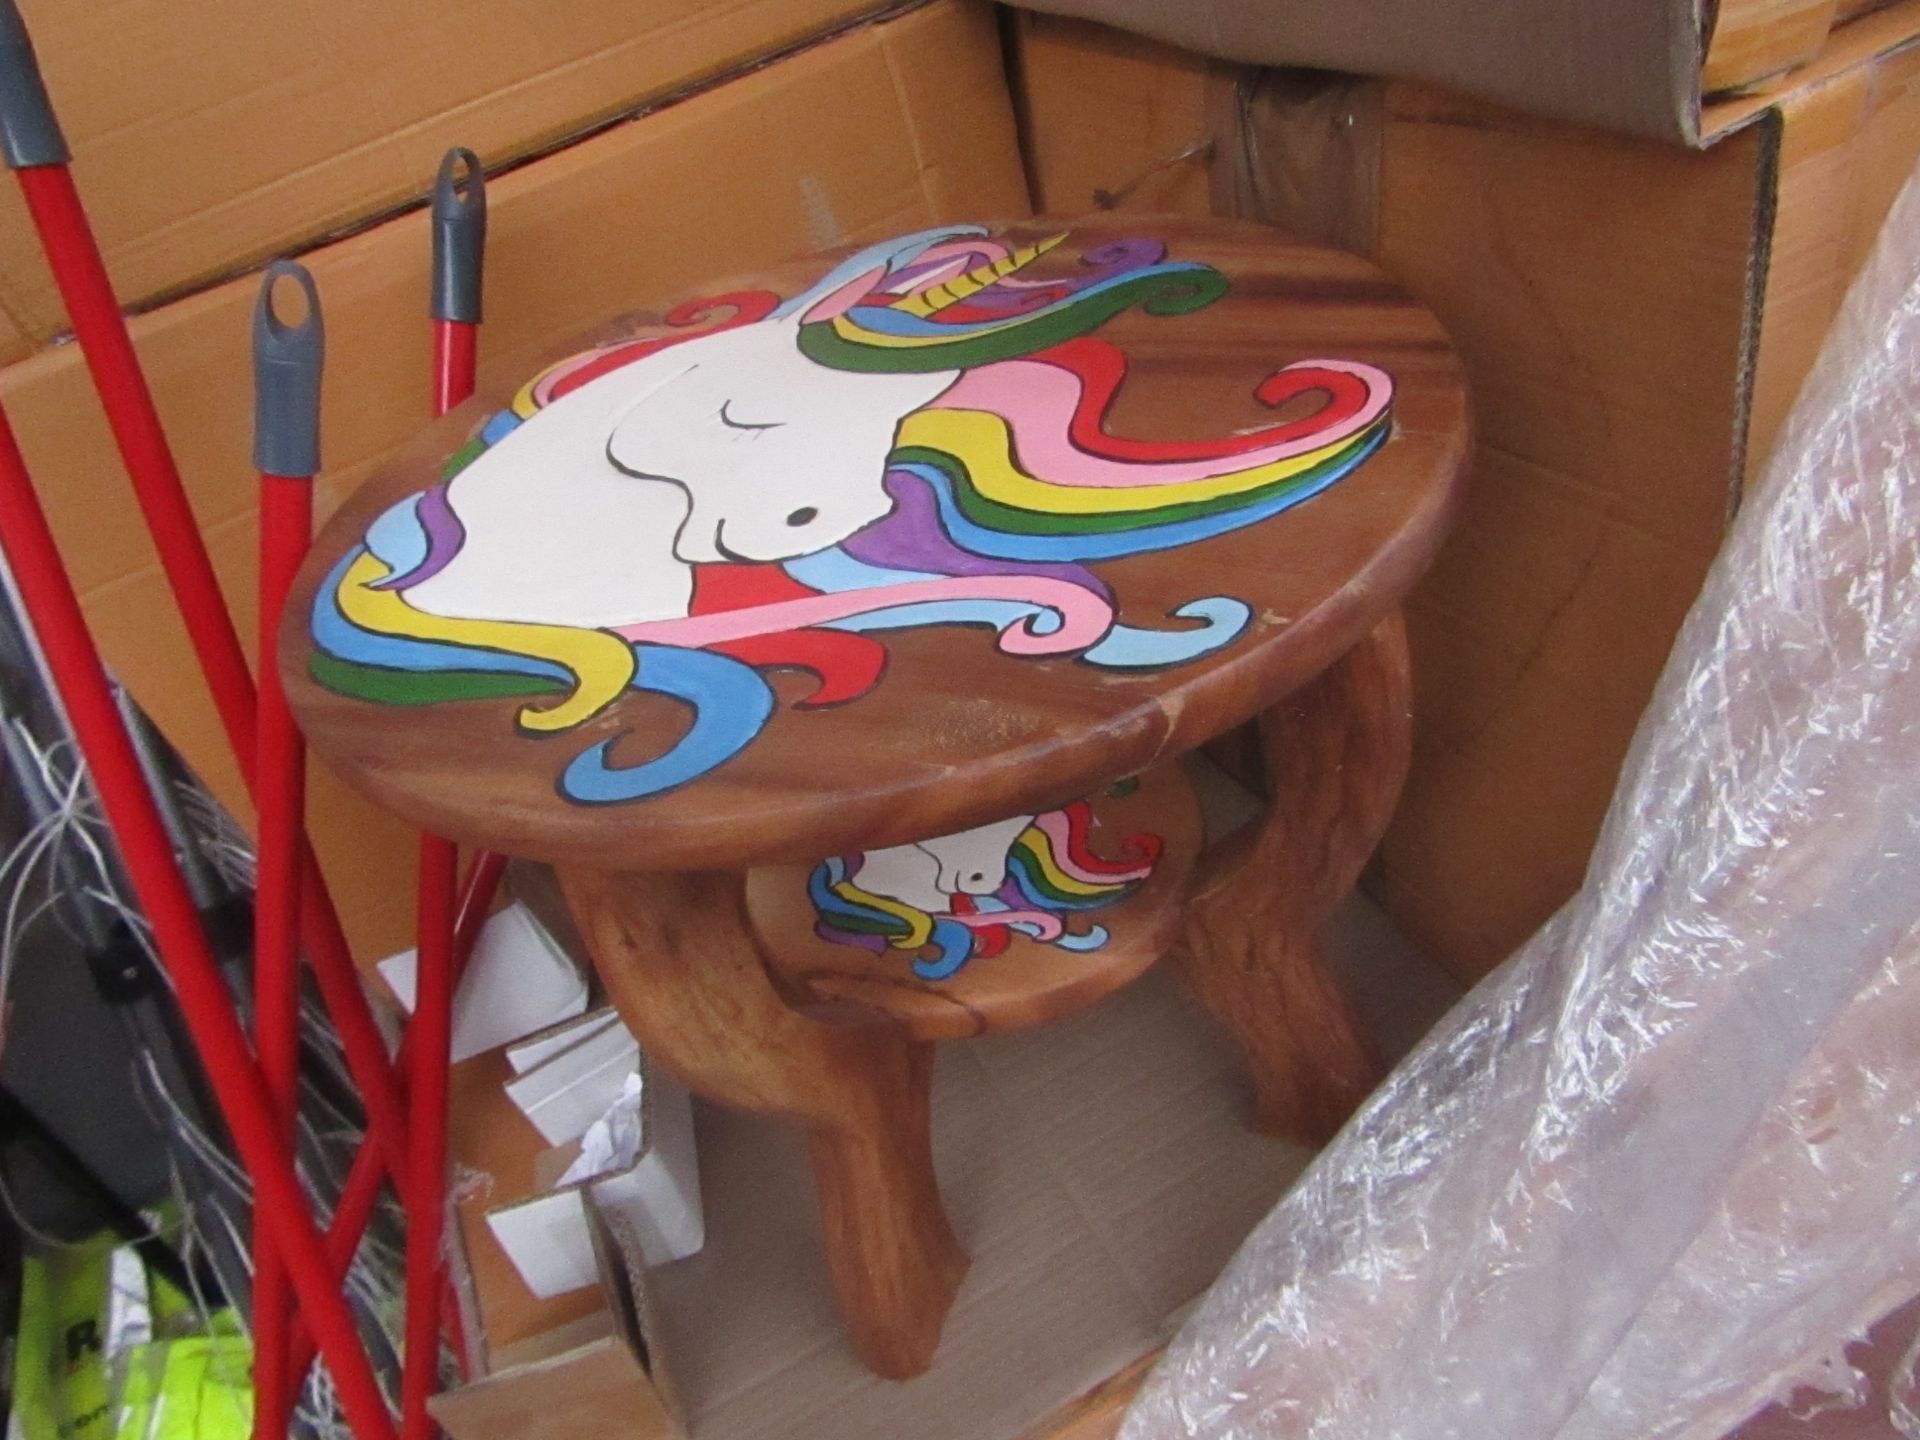 | 1x | CHILDRENS ROUND TABLE WITH UNICORN DESIGN | LOOK TO BE IN GOOD CONDITION BUT COULD HAVE A FEW